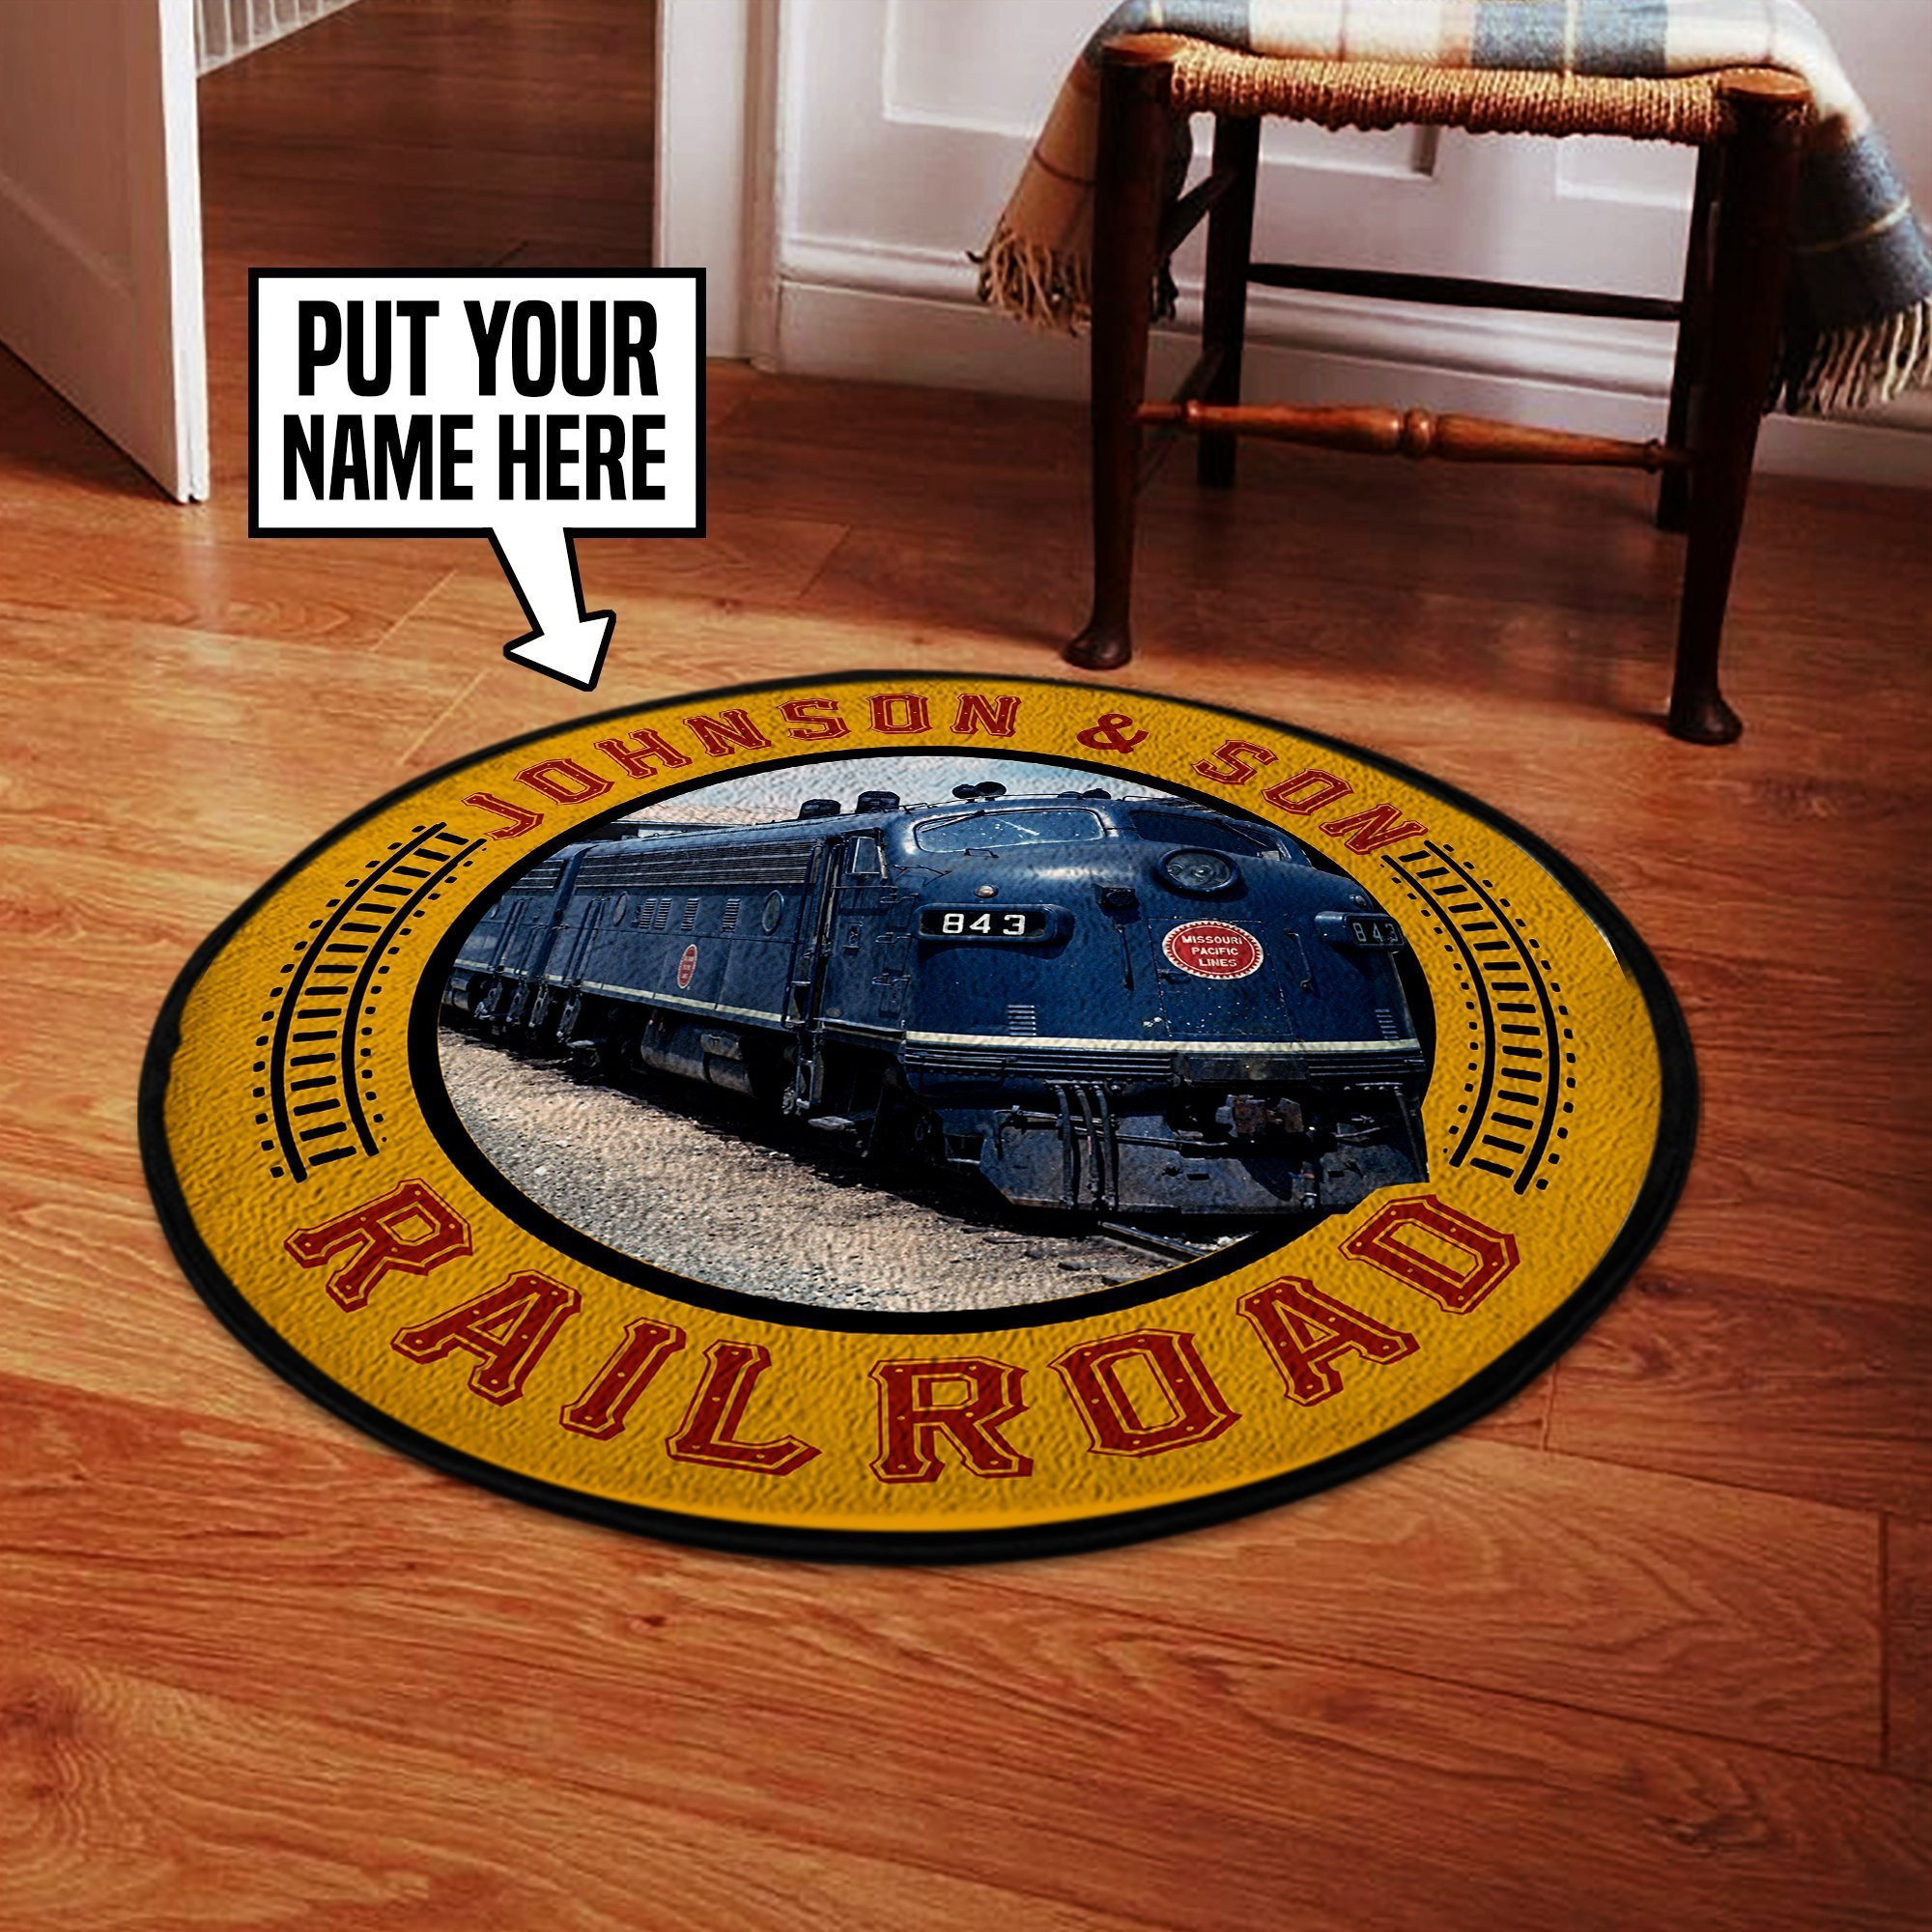 Personalized Missouri Pacific Railroad Round Mat Round Floor Mat Room Rugs Carpet Outdoor Rug Washable Rugs S (24In)